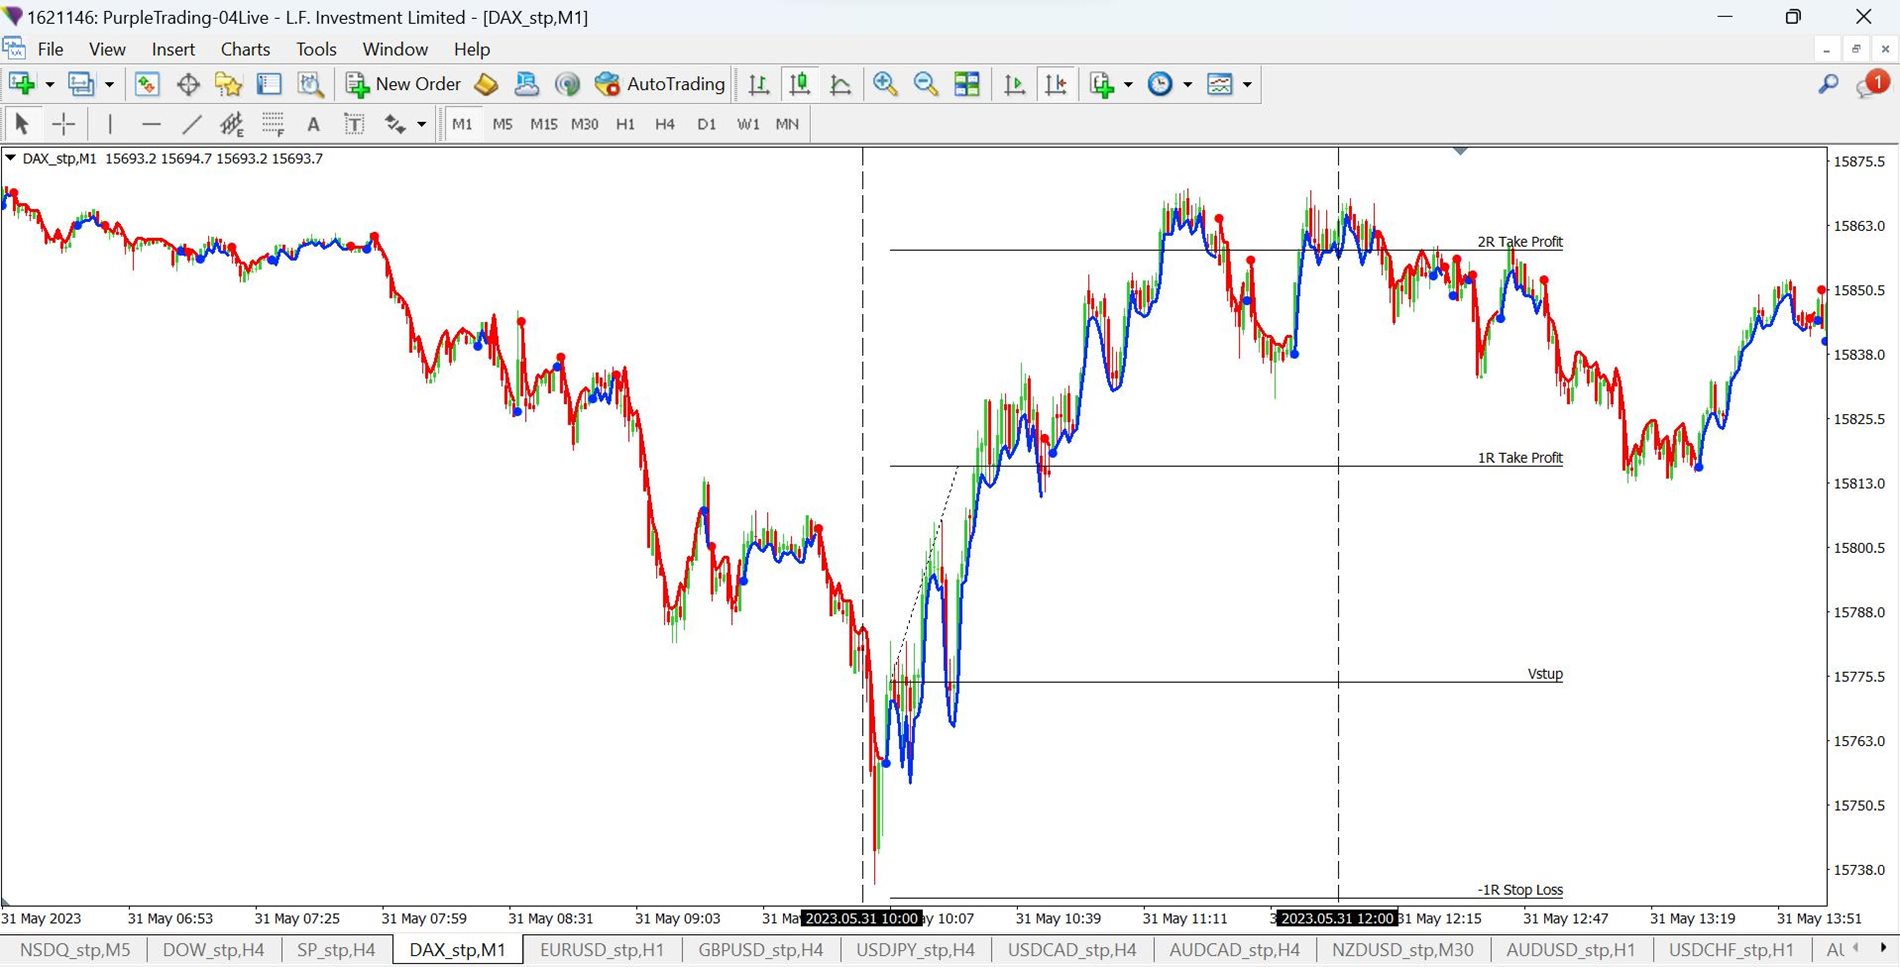 DAX index on the 1-minute chart